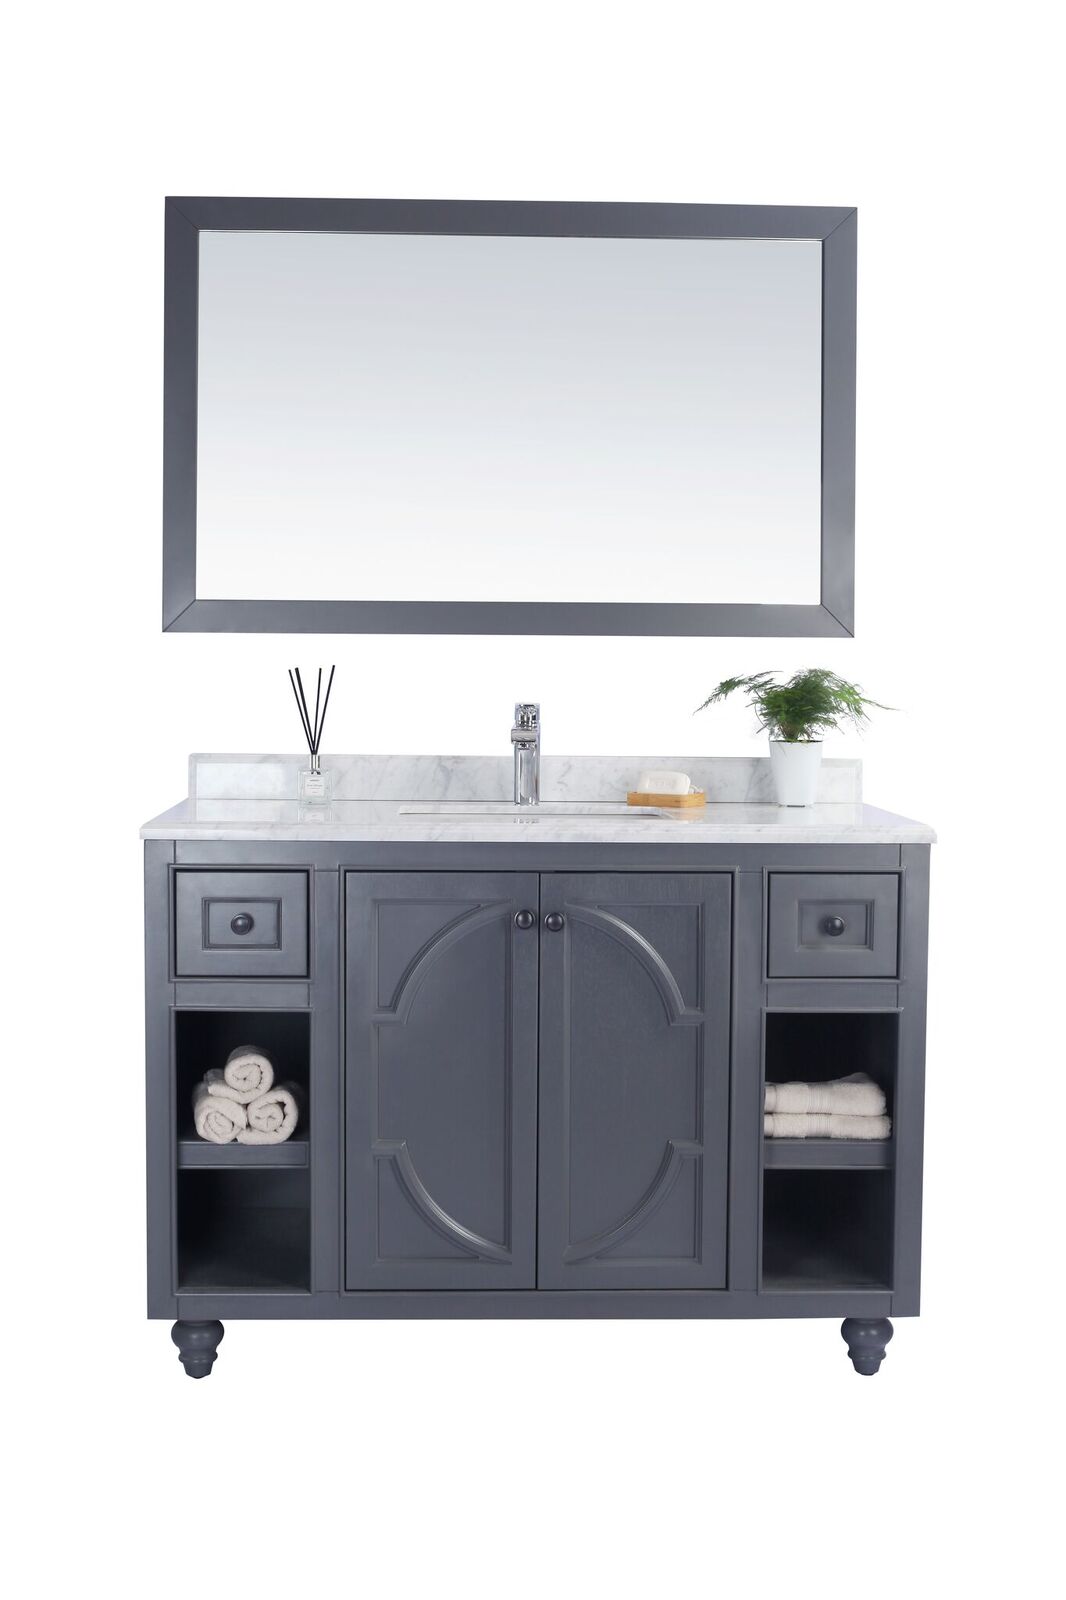 48" Single Bathroom Vanity Cabinet + Top and Color Options